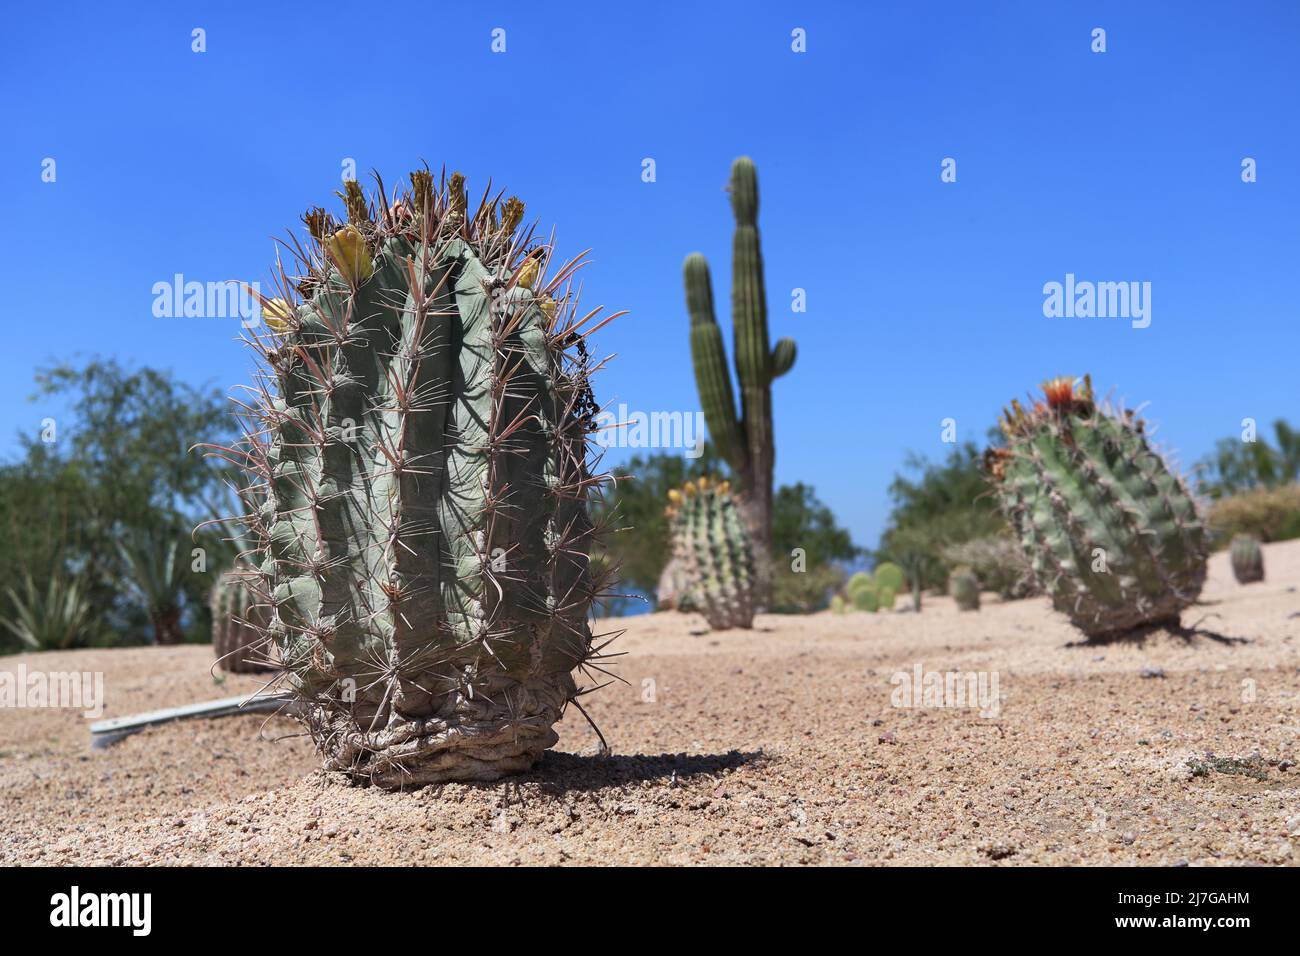 Melocactus azureus in bloom, cactus native to Brazil, in a garden with other cacti Stock Photo